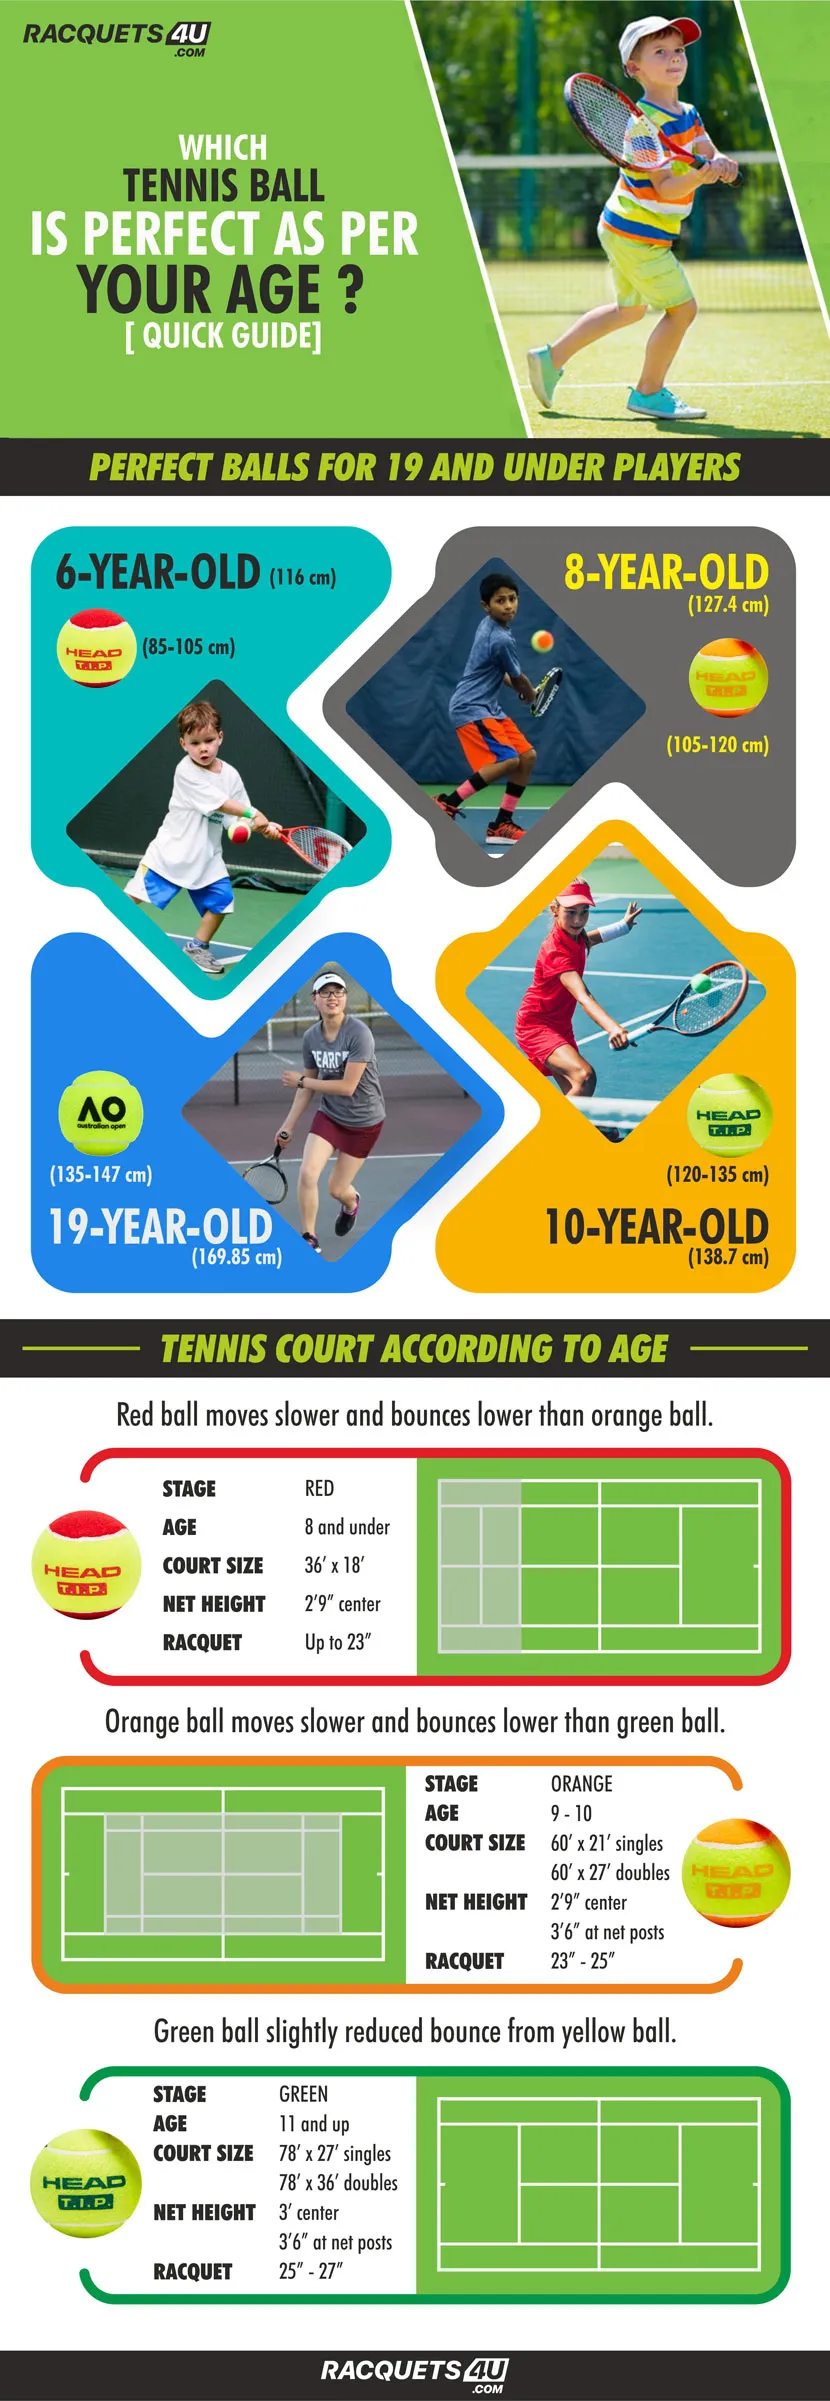 Which Tennis Ball is Perfect as Per Your Age?